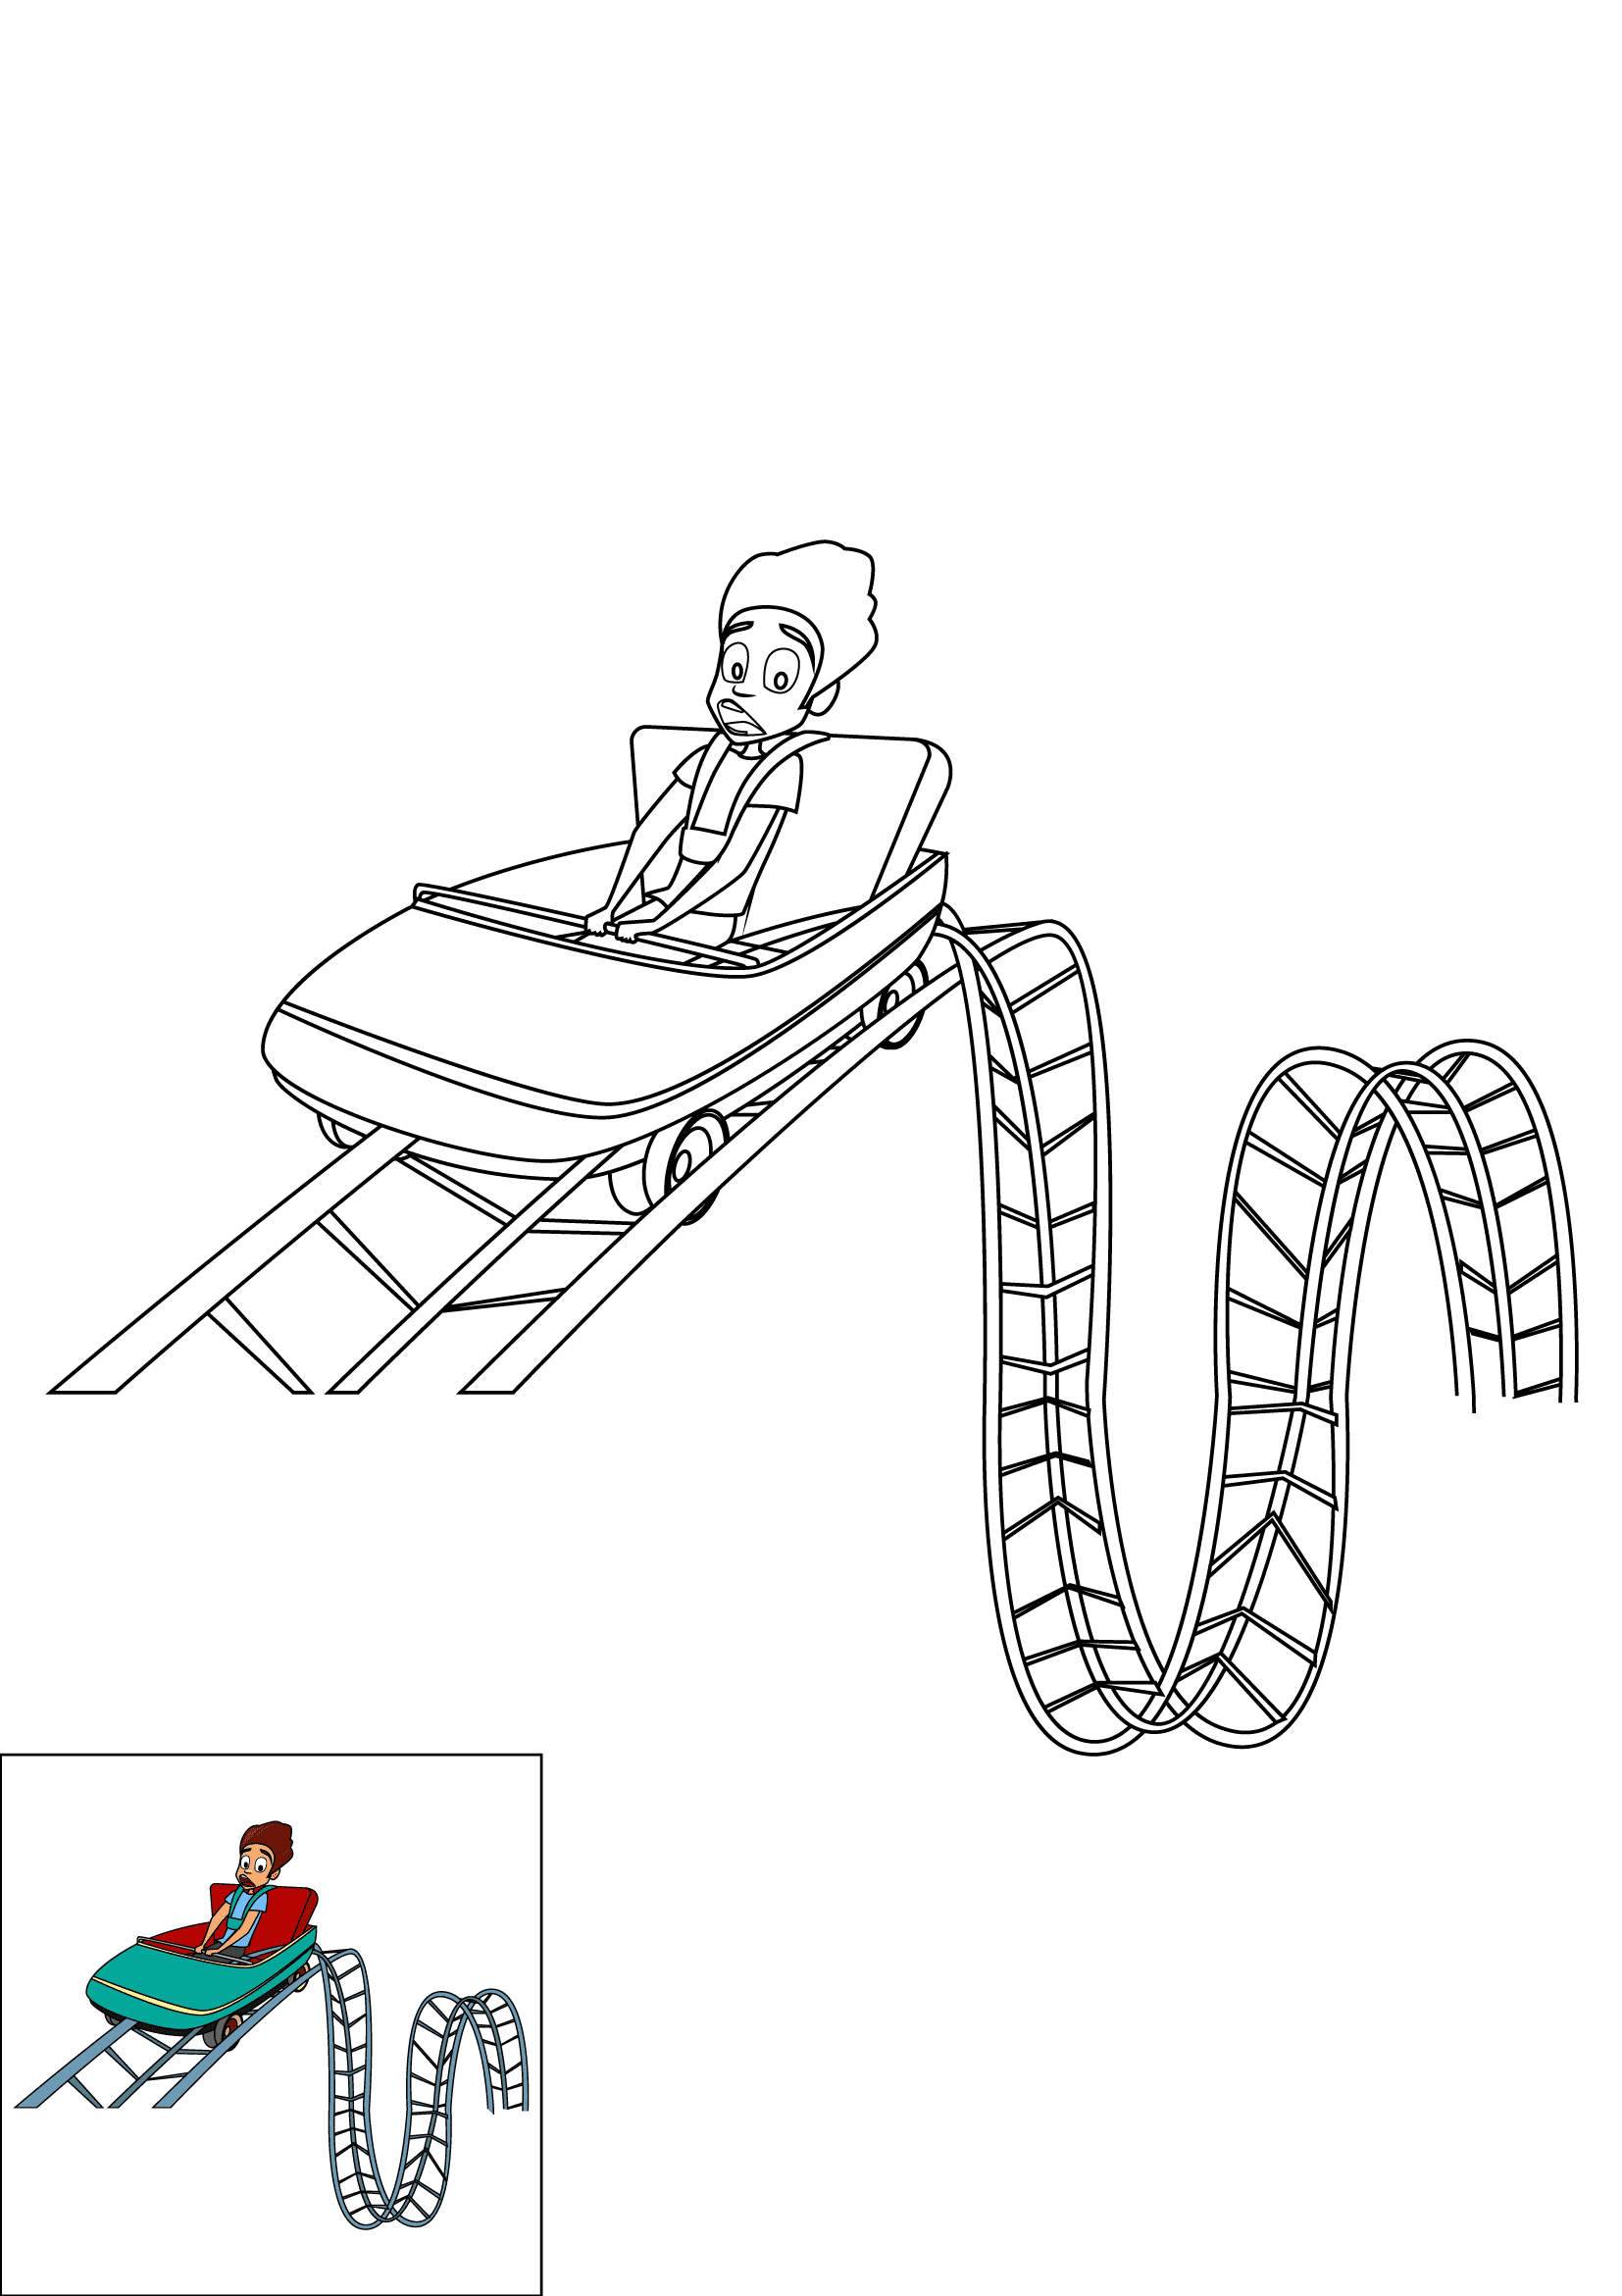 How to Draw A Roller Coaster Step by Step Printable Color